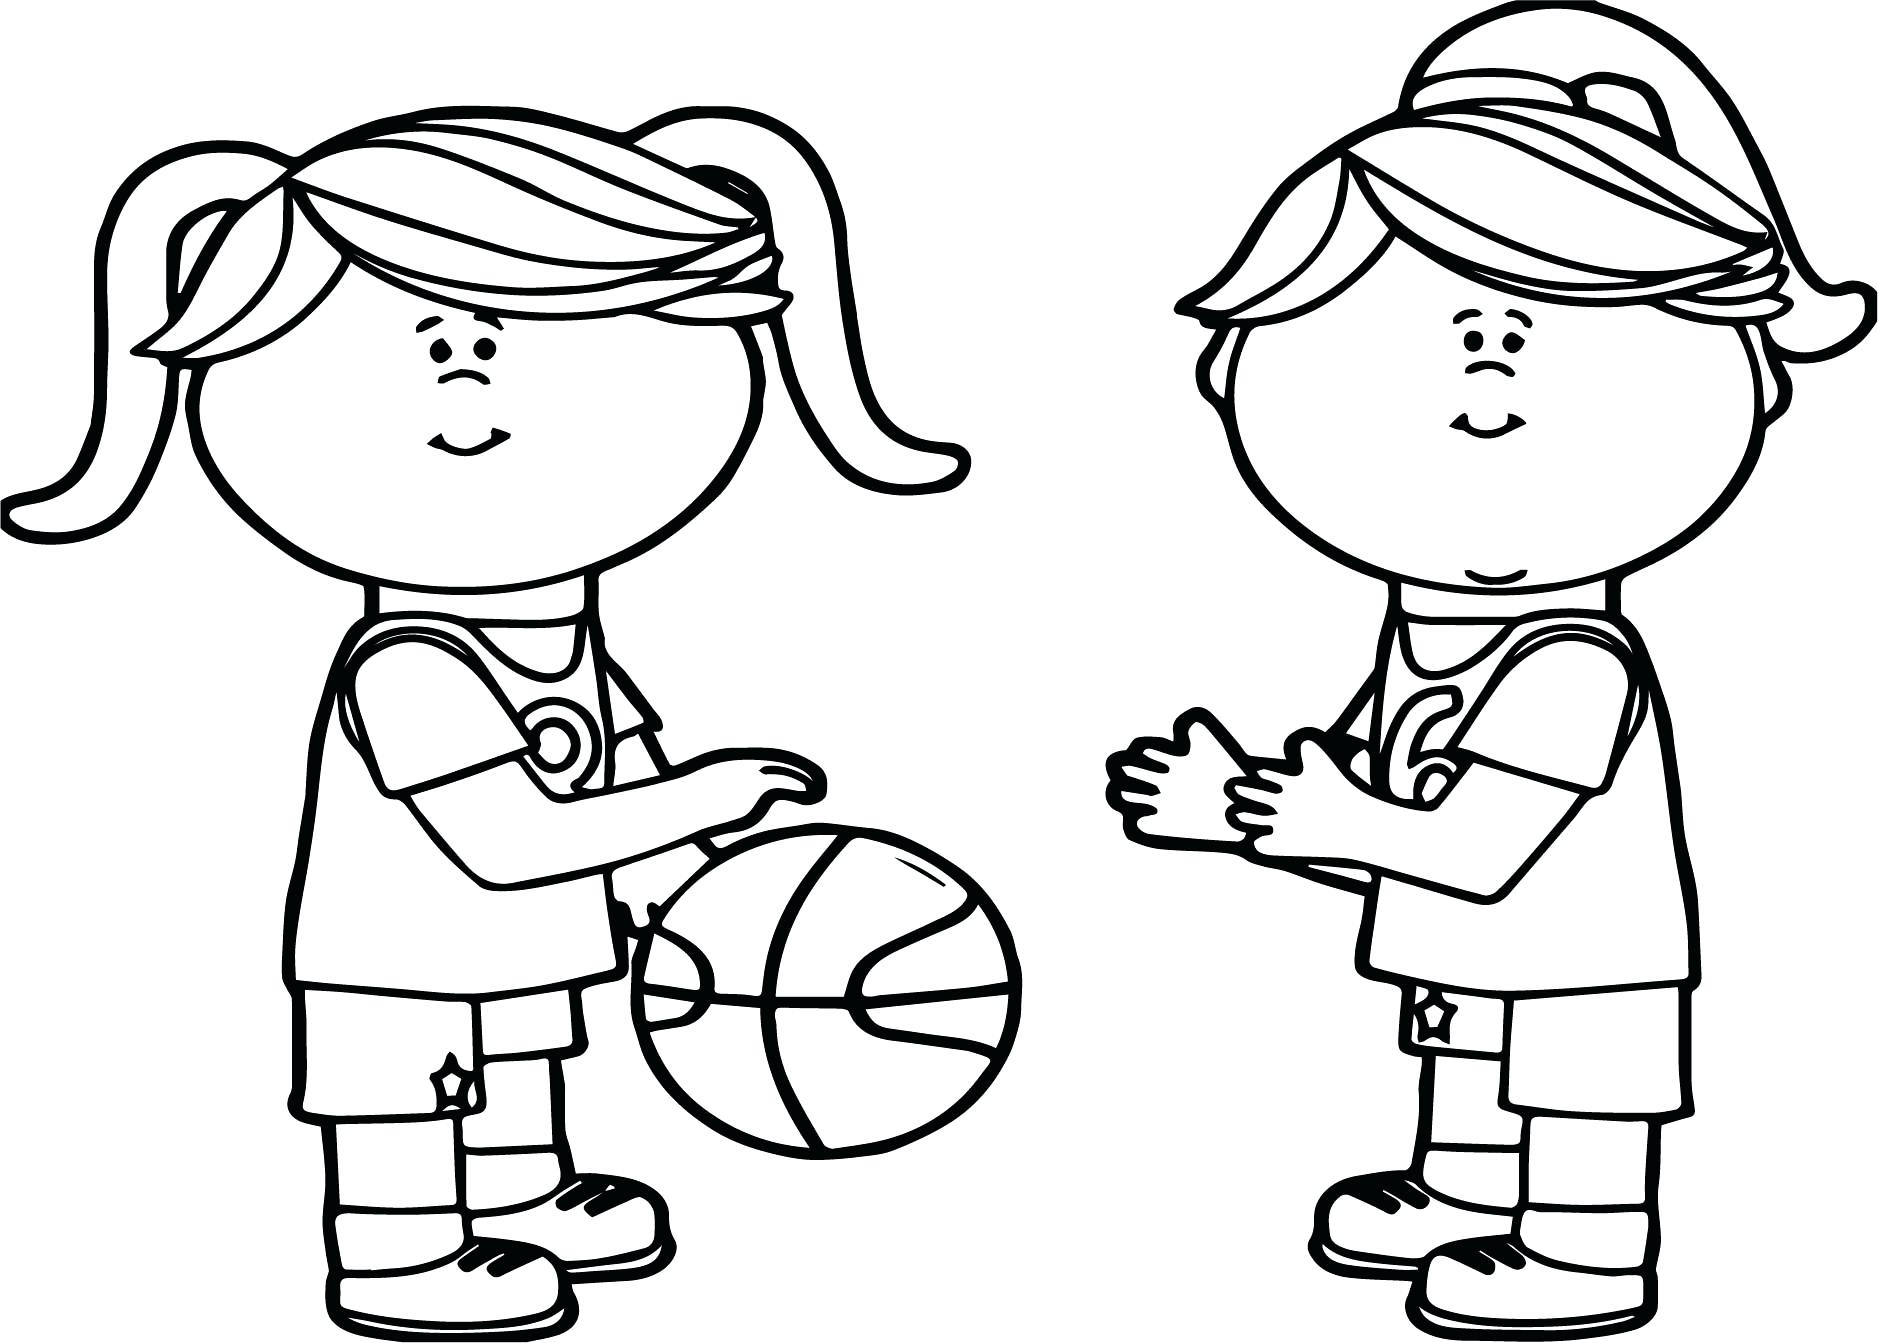 Stephen Curry Coloring Pages To Print At Getcolorings Free